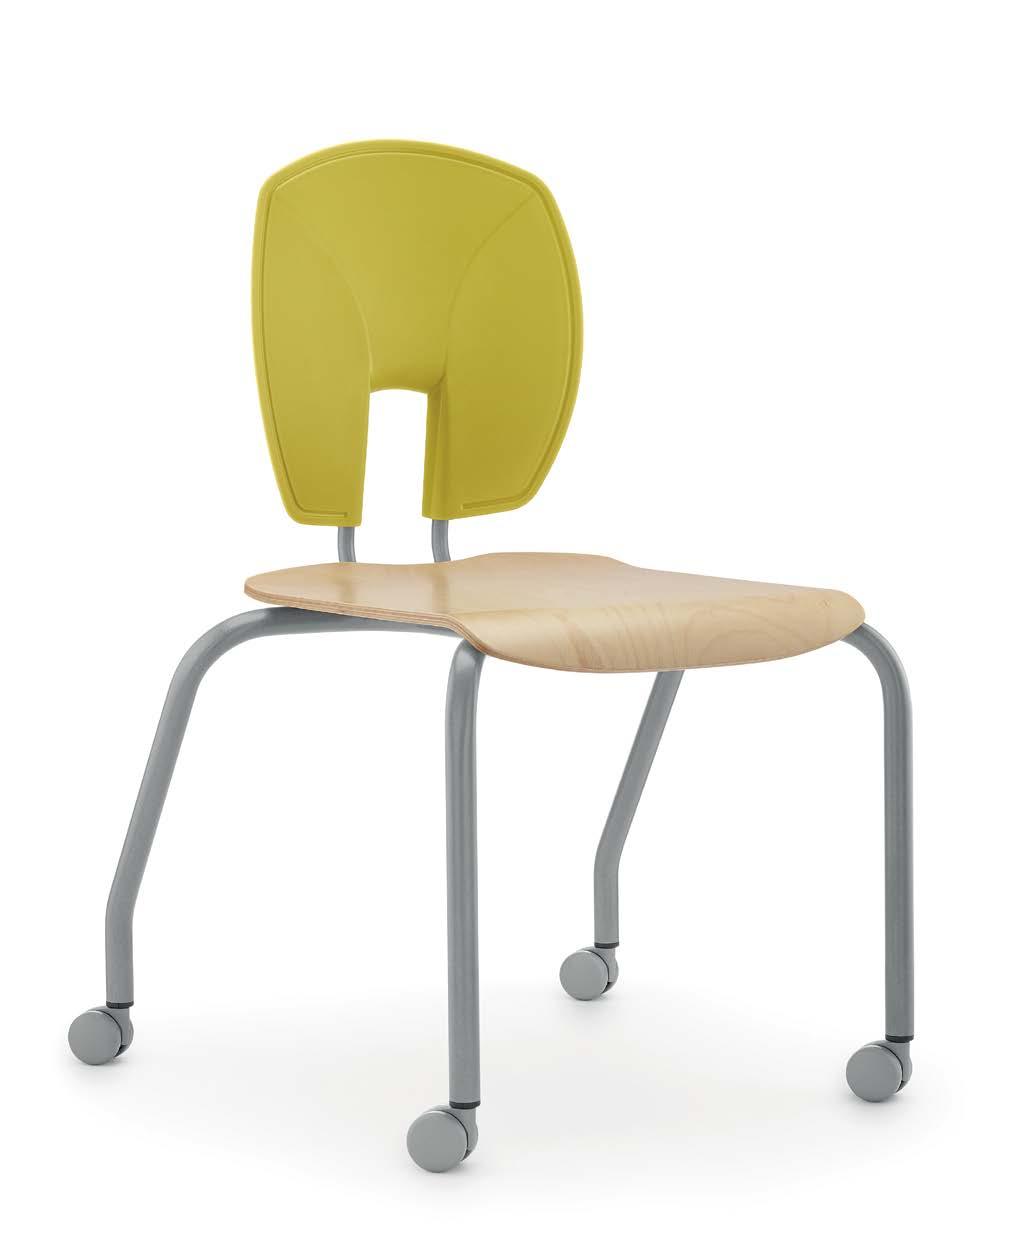 SE Motion Stacking chair The SE curve castor chair is perfect for flexible learning environments where seating needs to be truly manoeuvrable in use and yet still stack when you